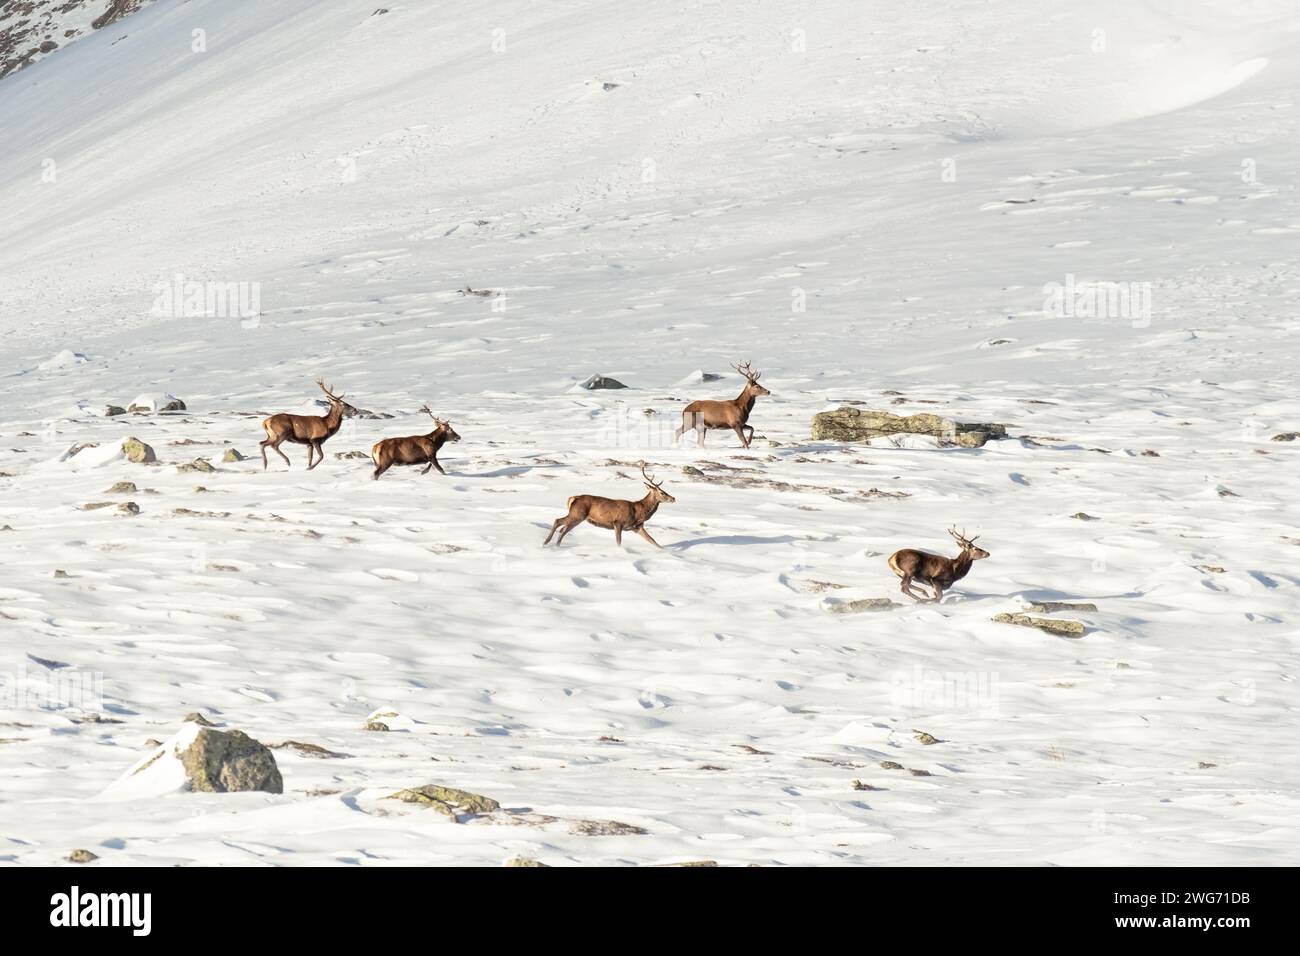 Incredibly wonderful scene of a herd of Red deer stags (Cervus elaphus) running in deep snow in a winter alpine landscape with wide snowy meadow, Alps Stock Photo